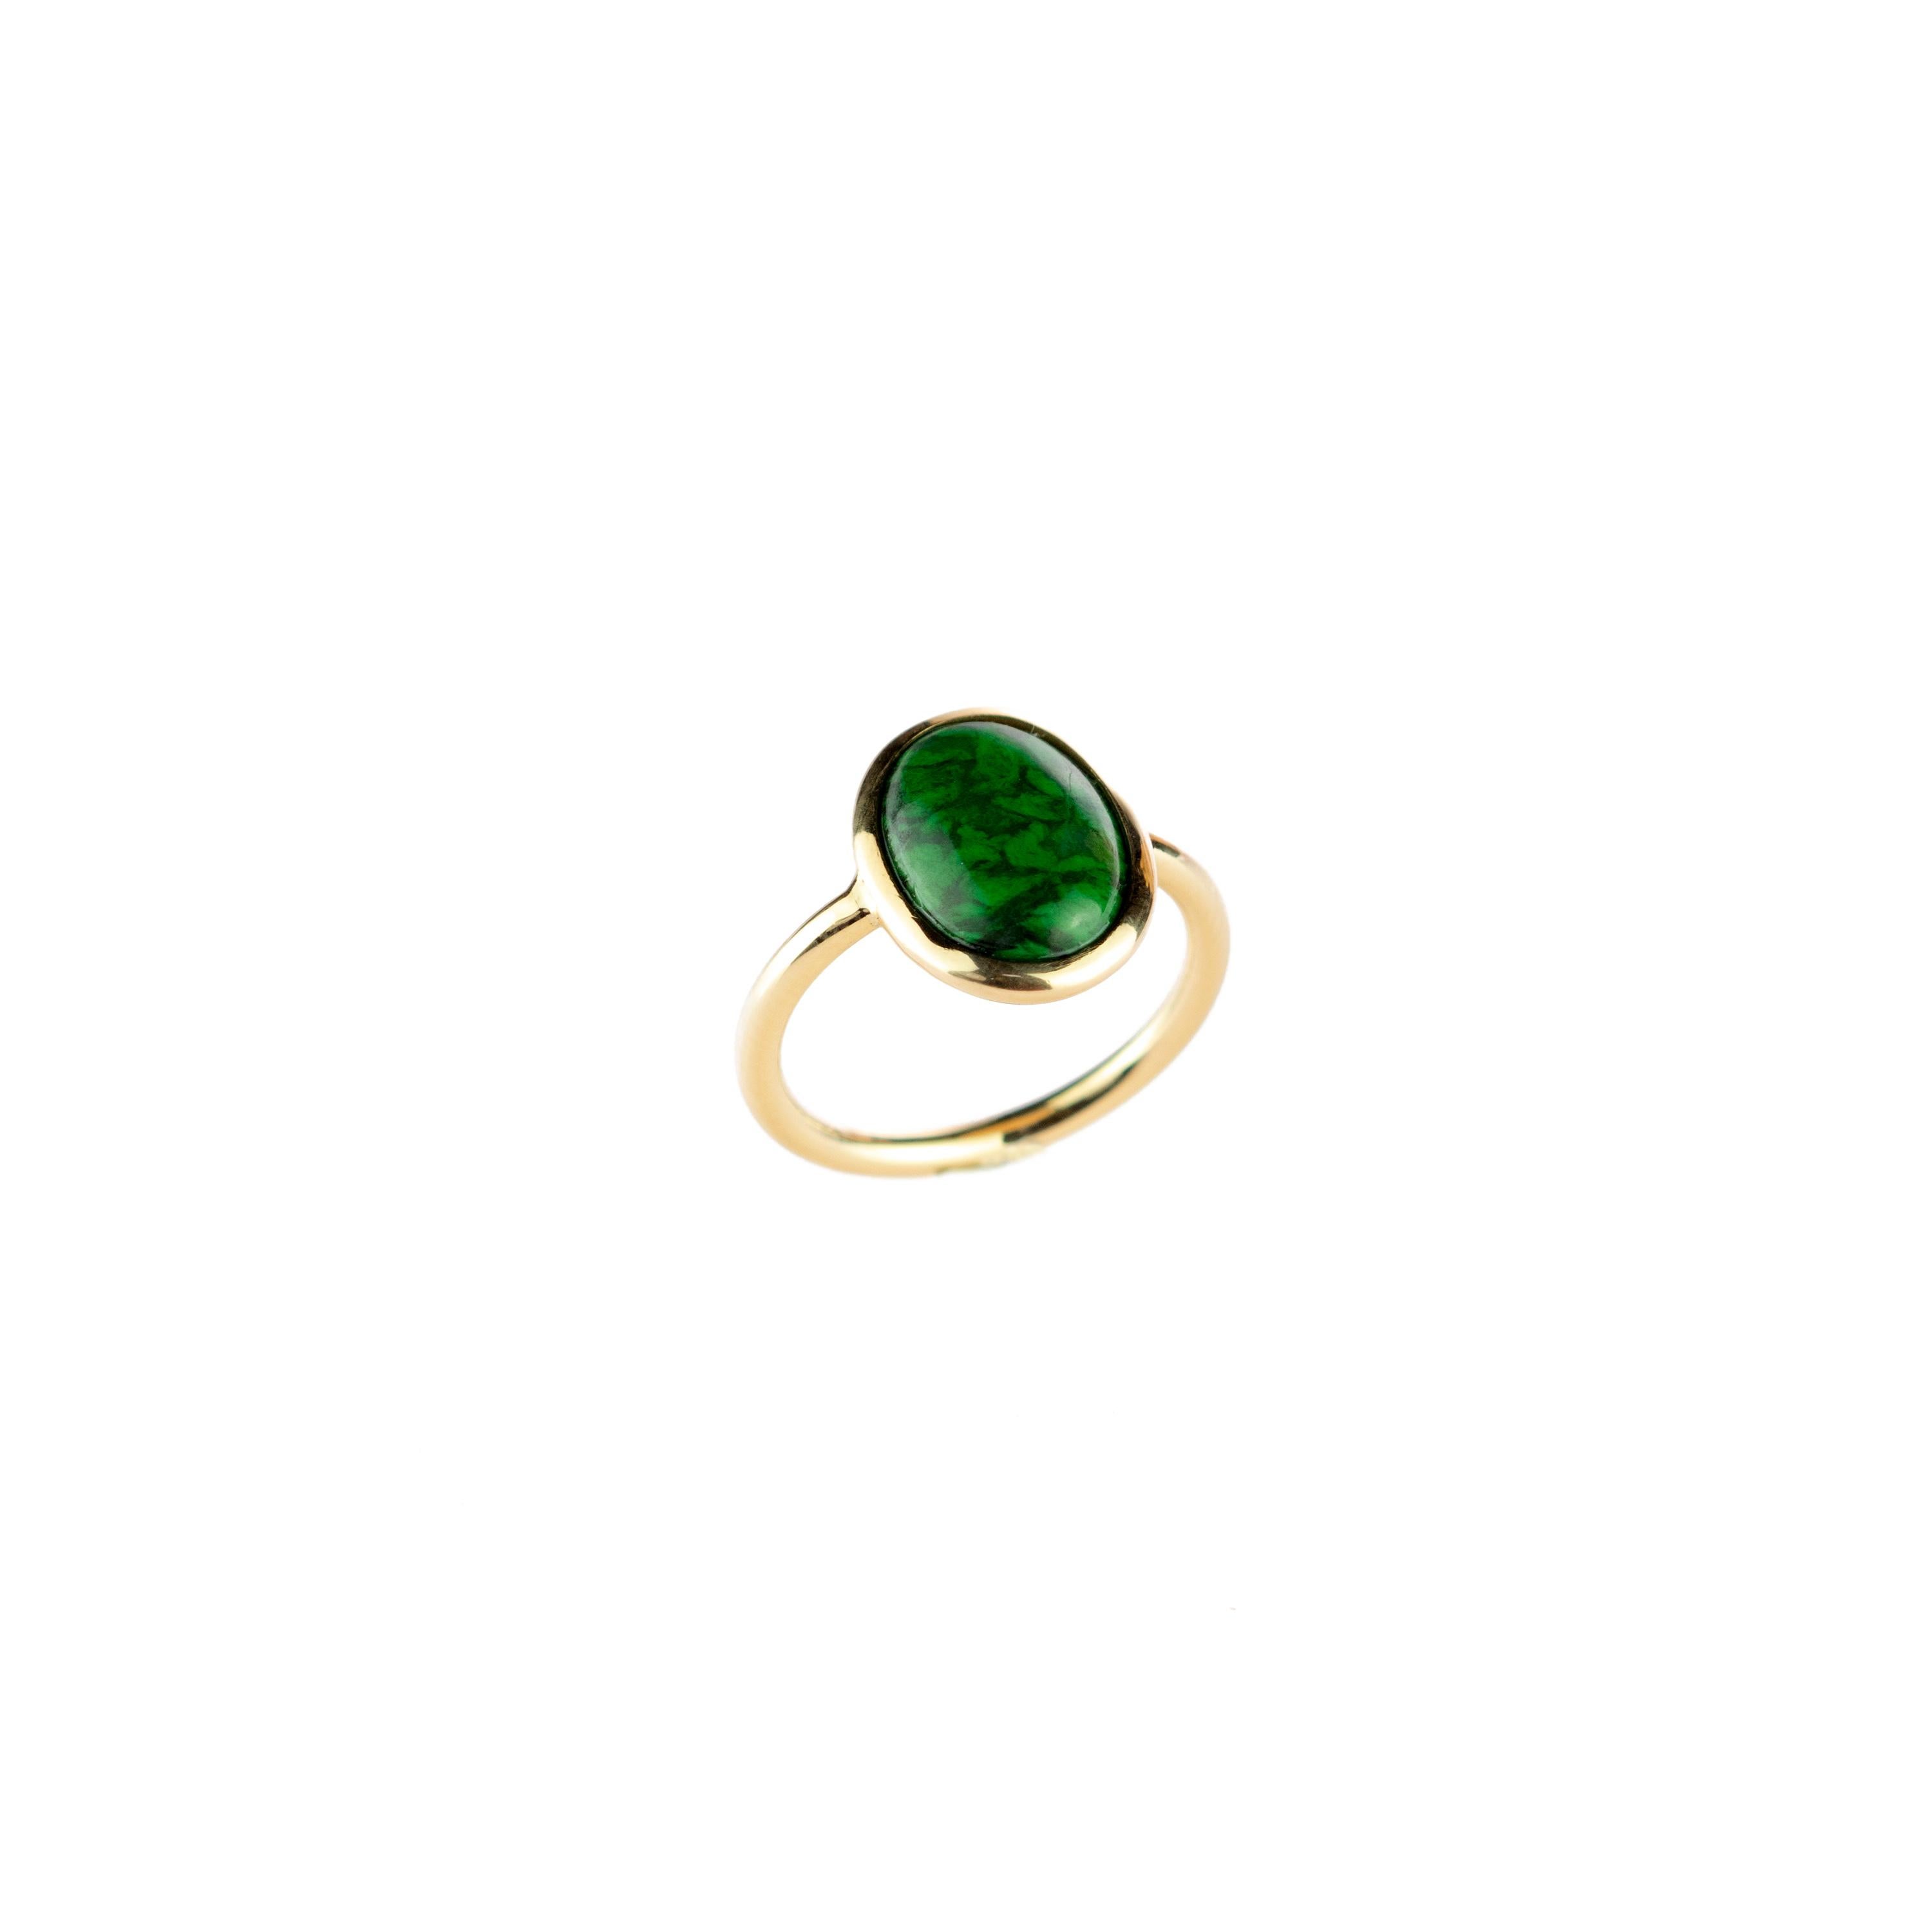 Inspire and glamorous yourself with this precious natural green jade stone situated north to south in a 18 karat yellow gold ring. A stylish and elegant piece perfect for any cocktail and occasion. The oval cabochon shape will embellish anyone who